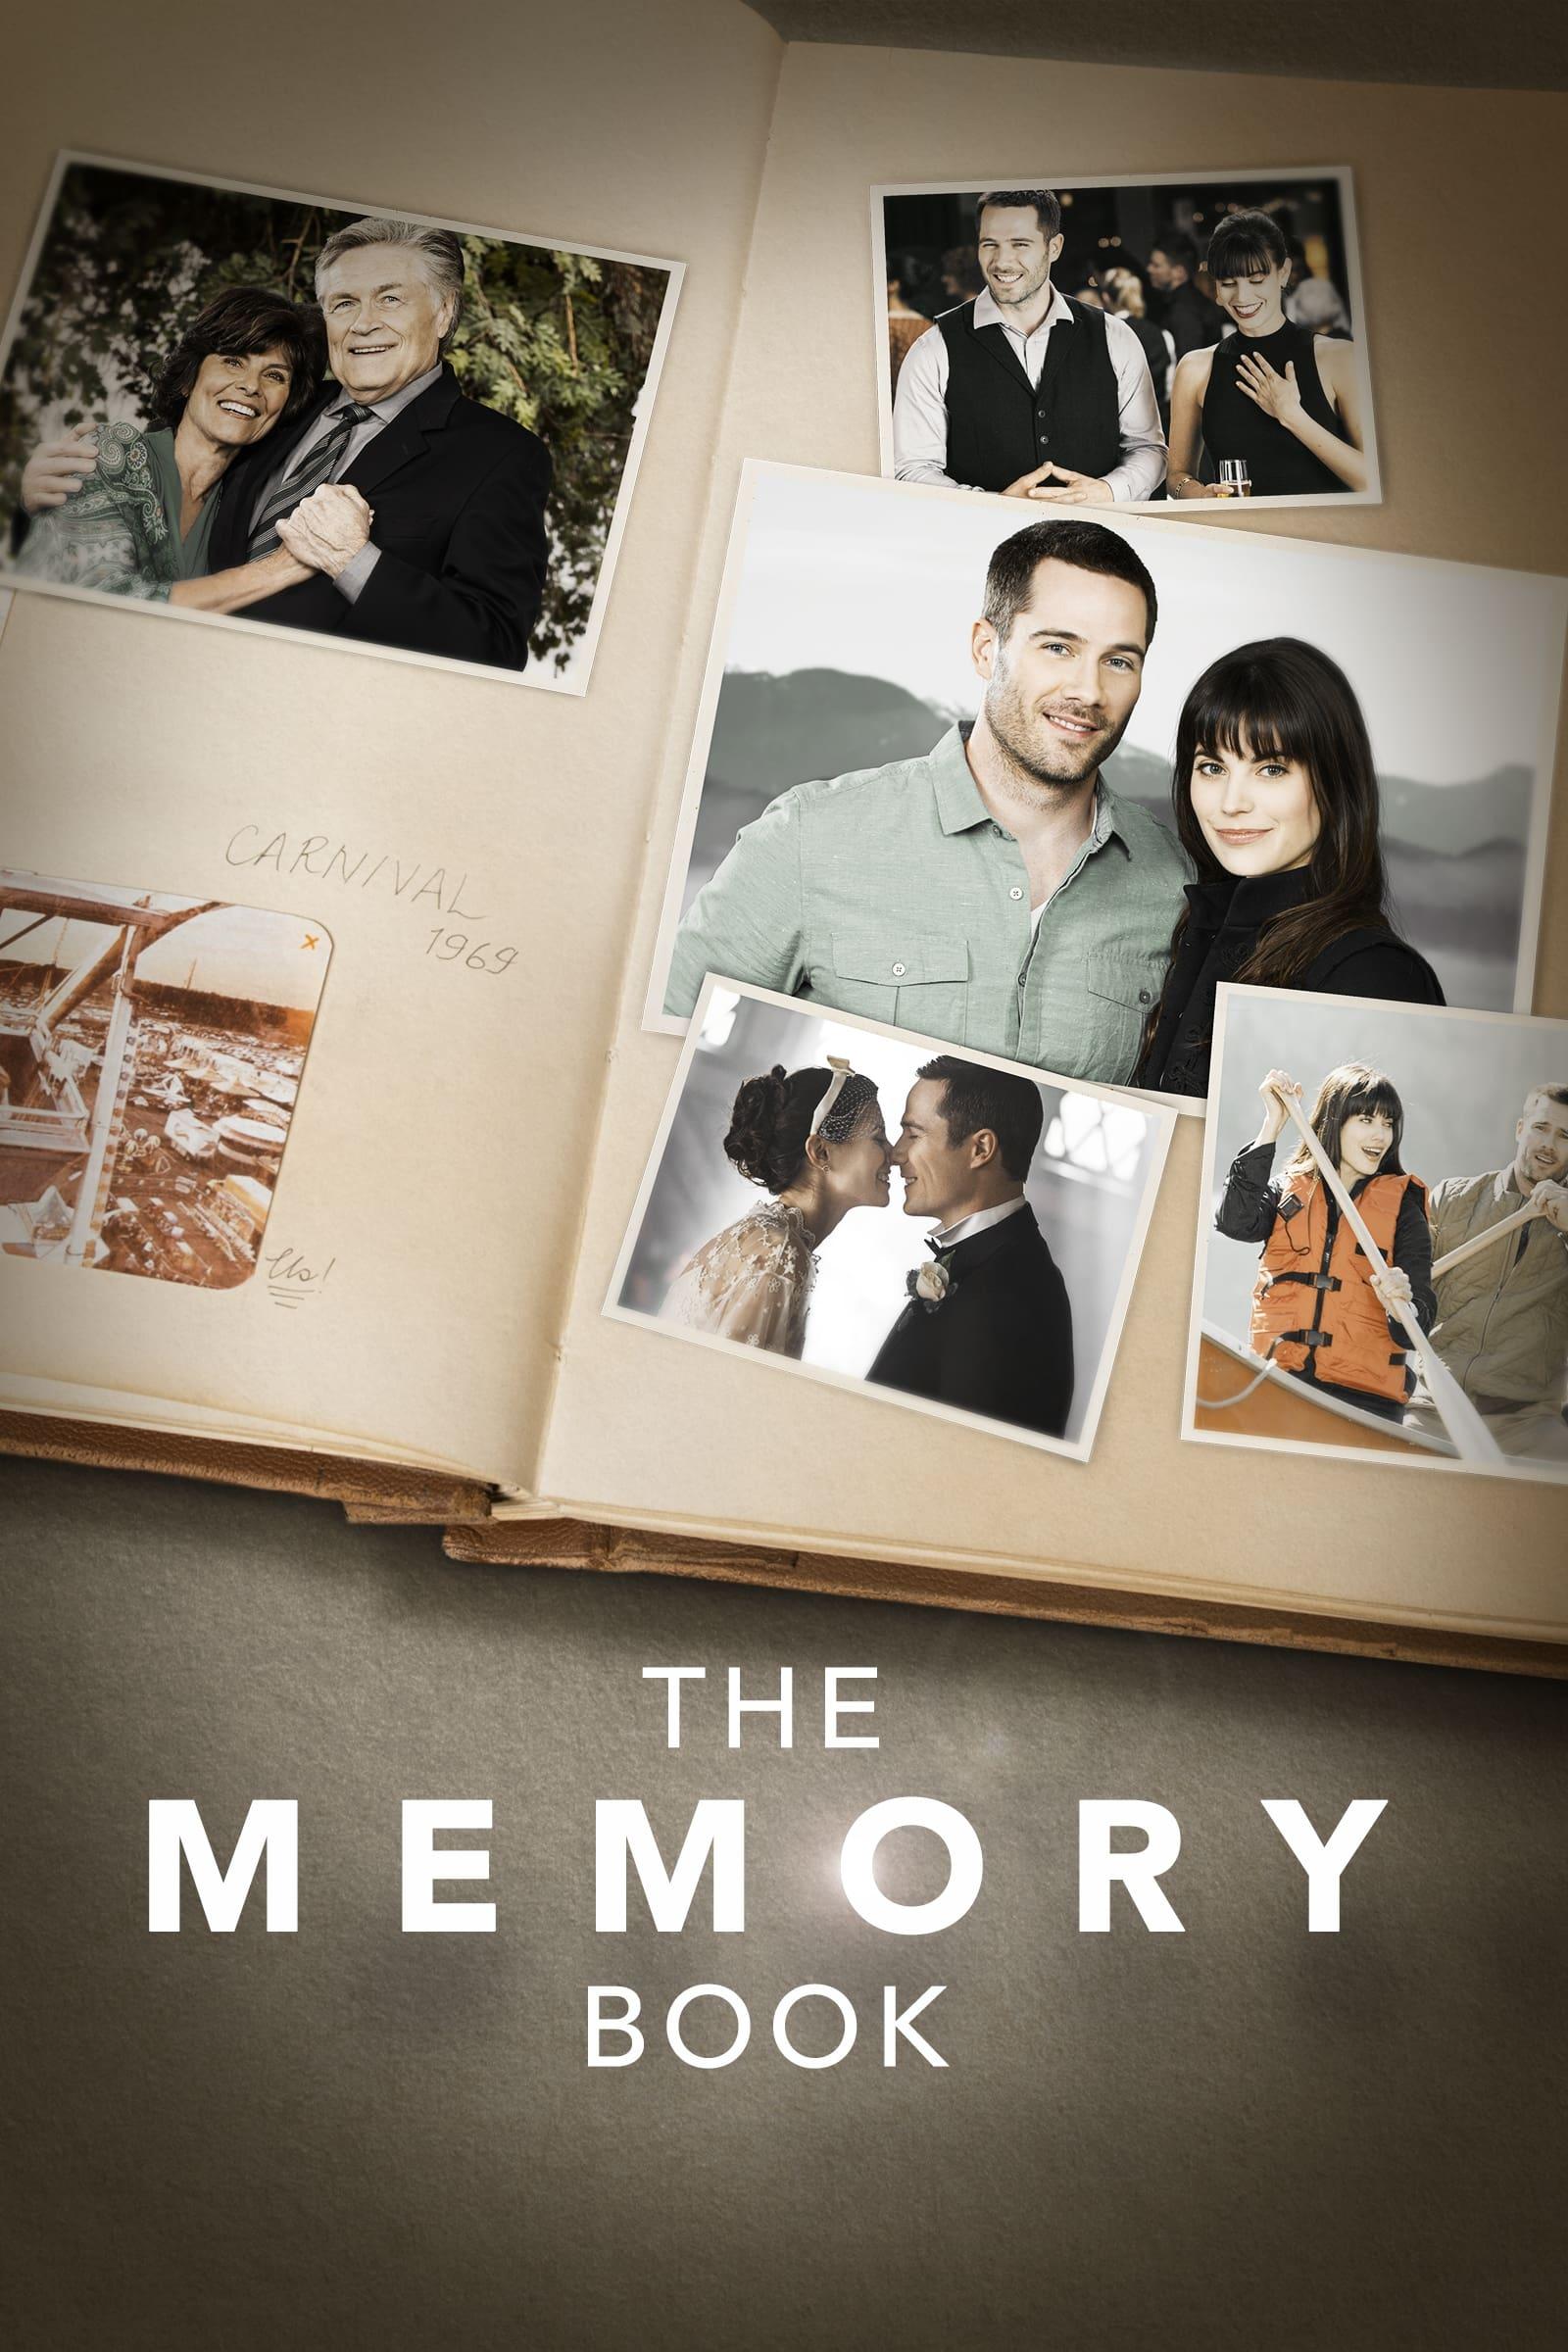 The Memory Book poster